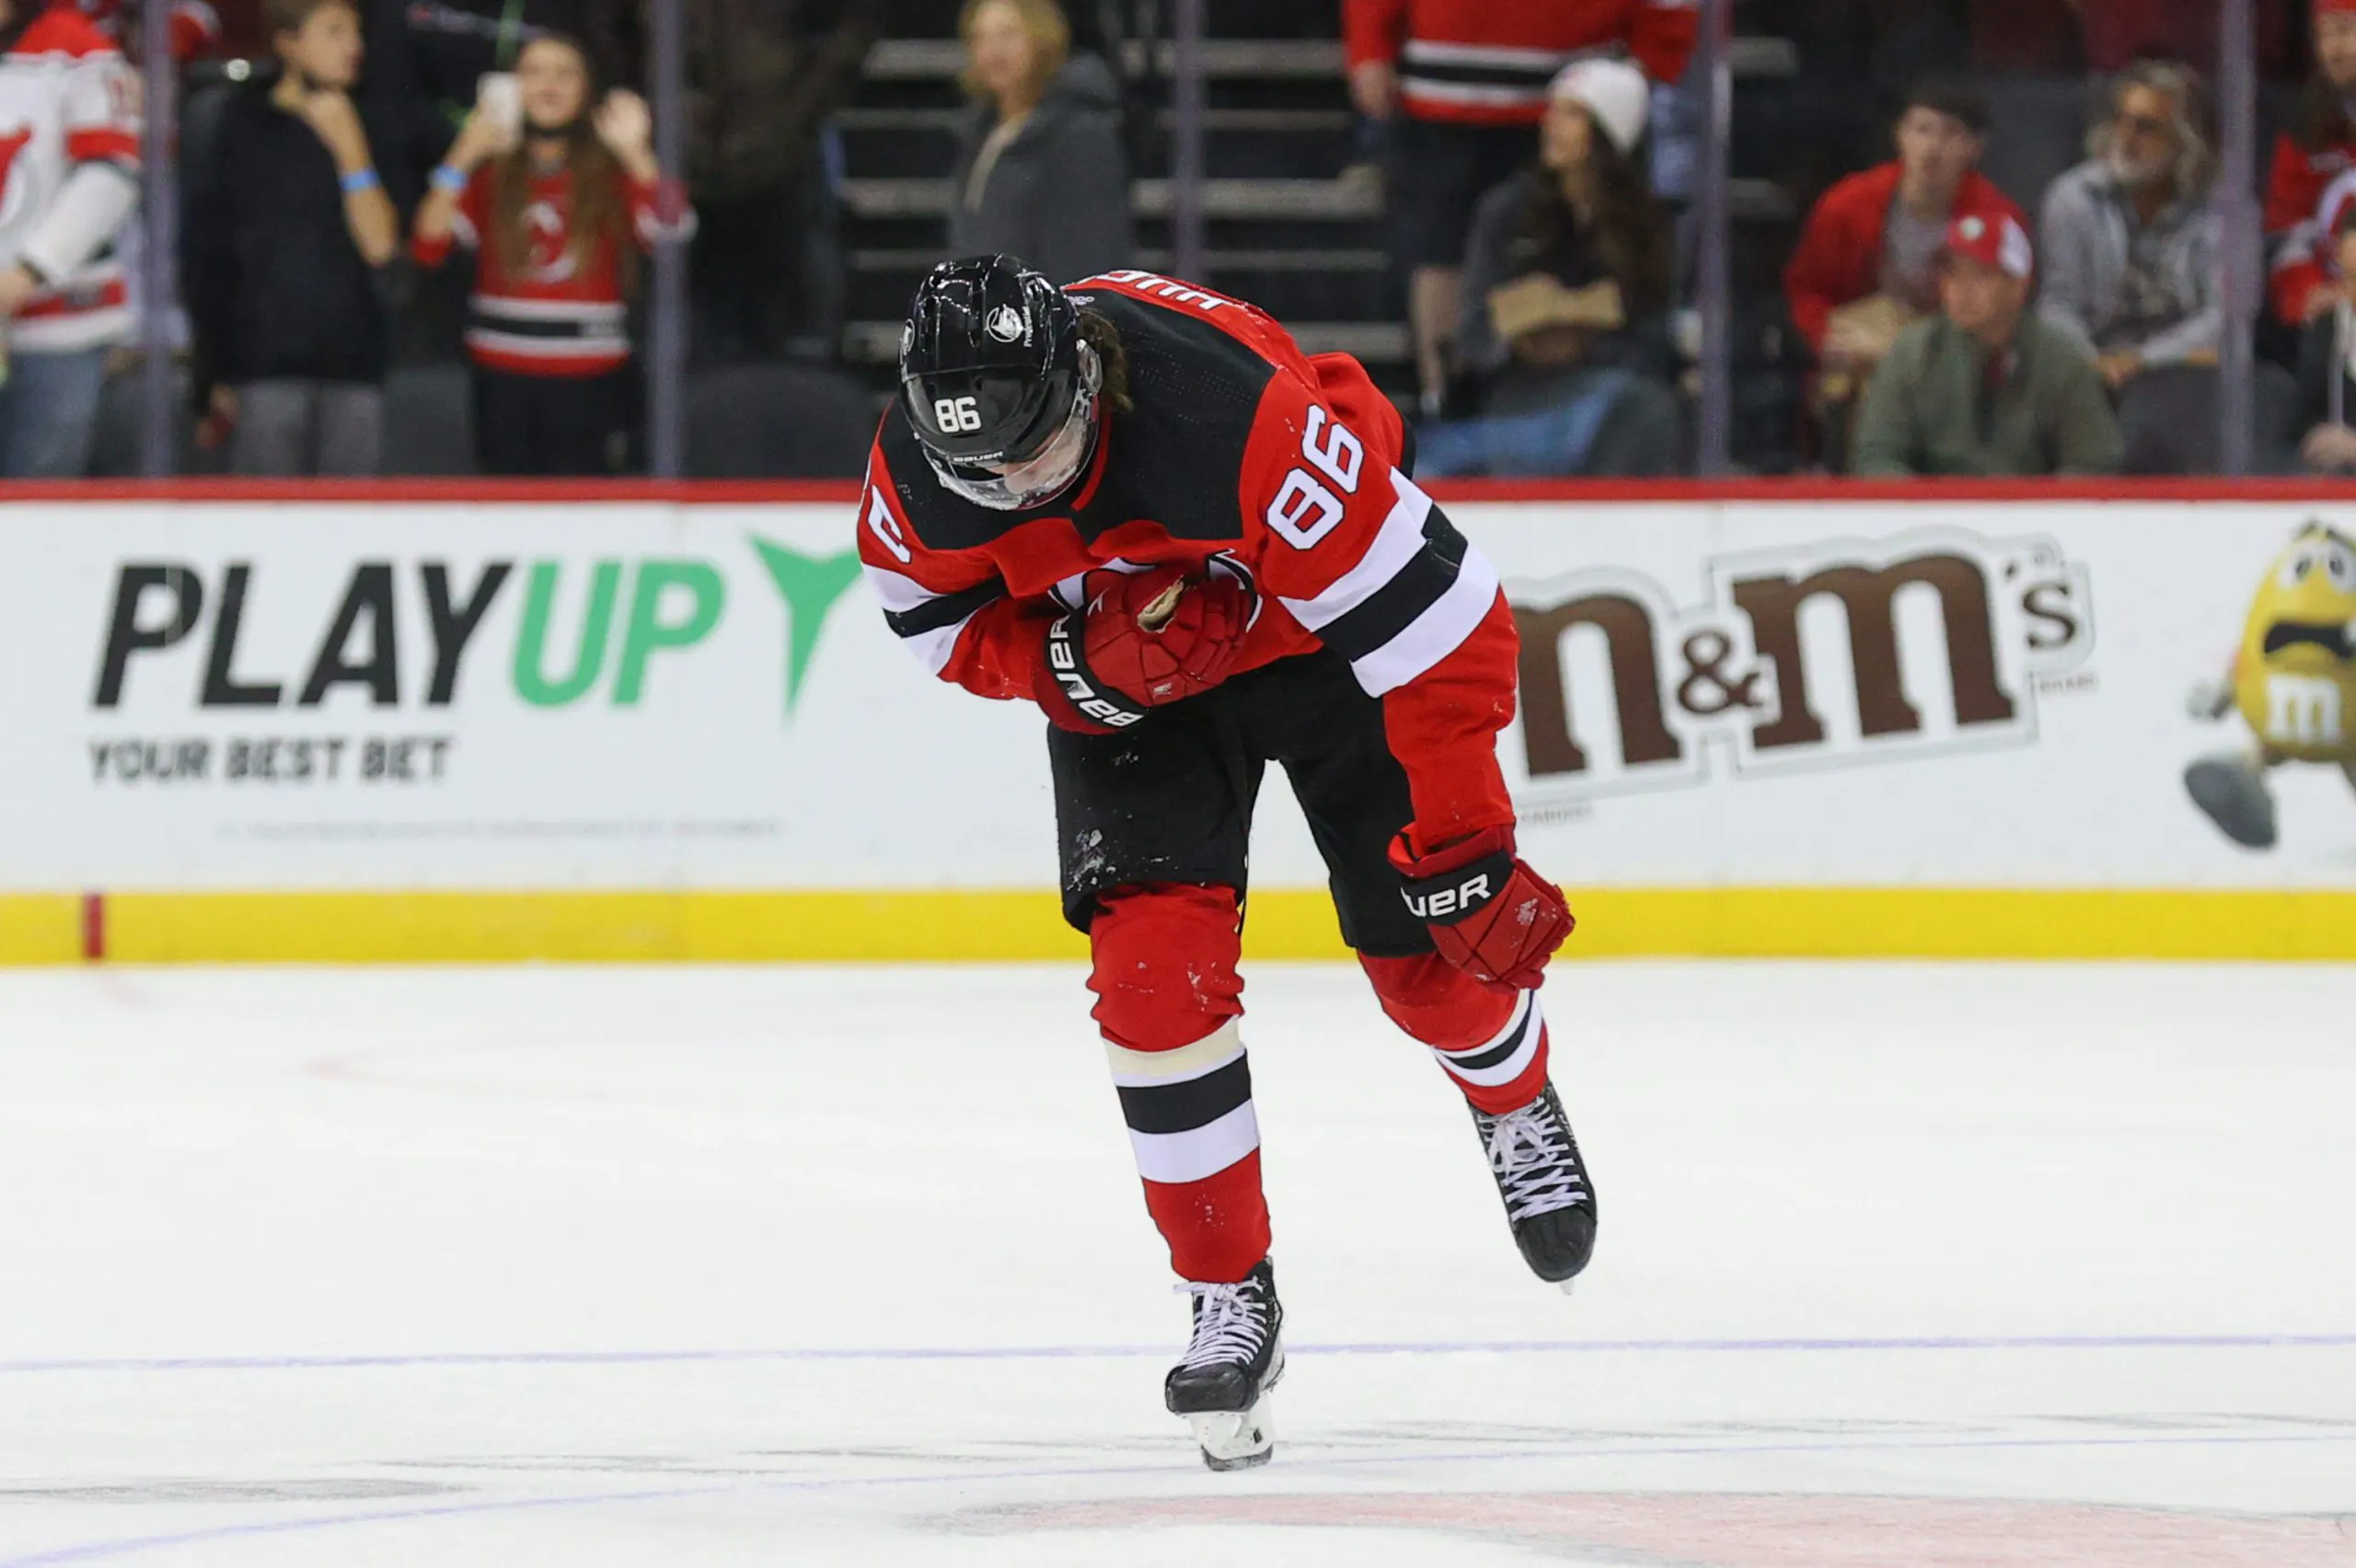 Jack Hughes is set to return to the Devils lineup after missing 17 games